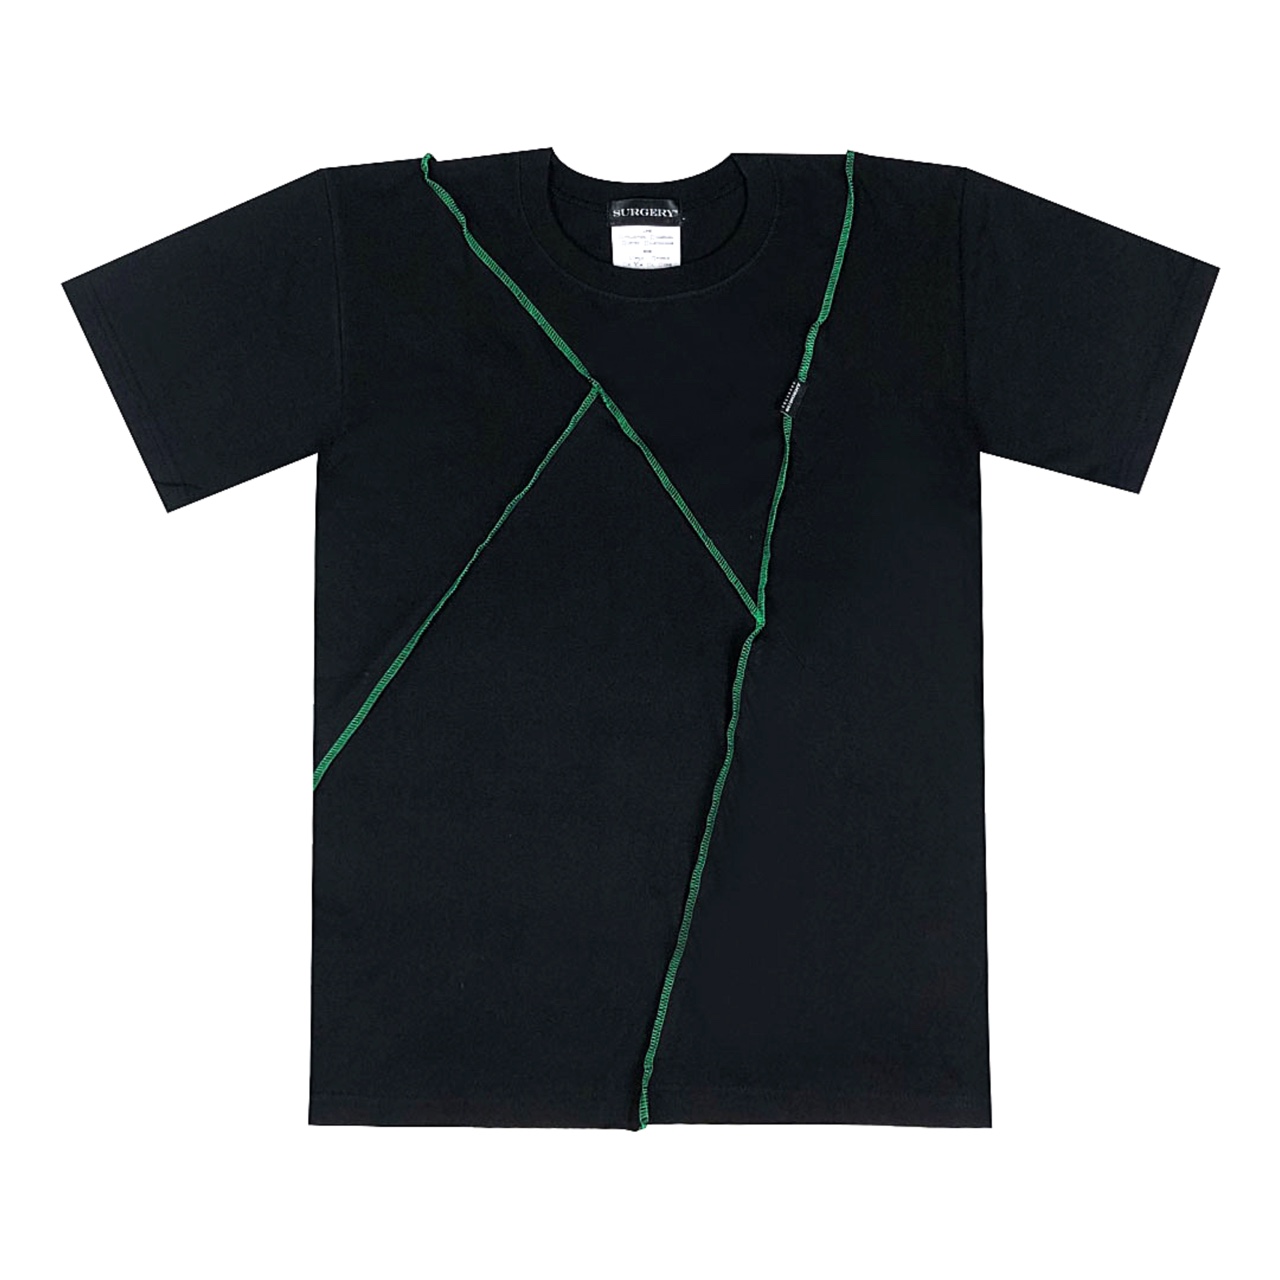 surgery label stitch t-shirts 'black' How To Modify T-shirts For Shoulder Surgery